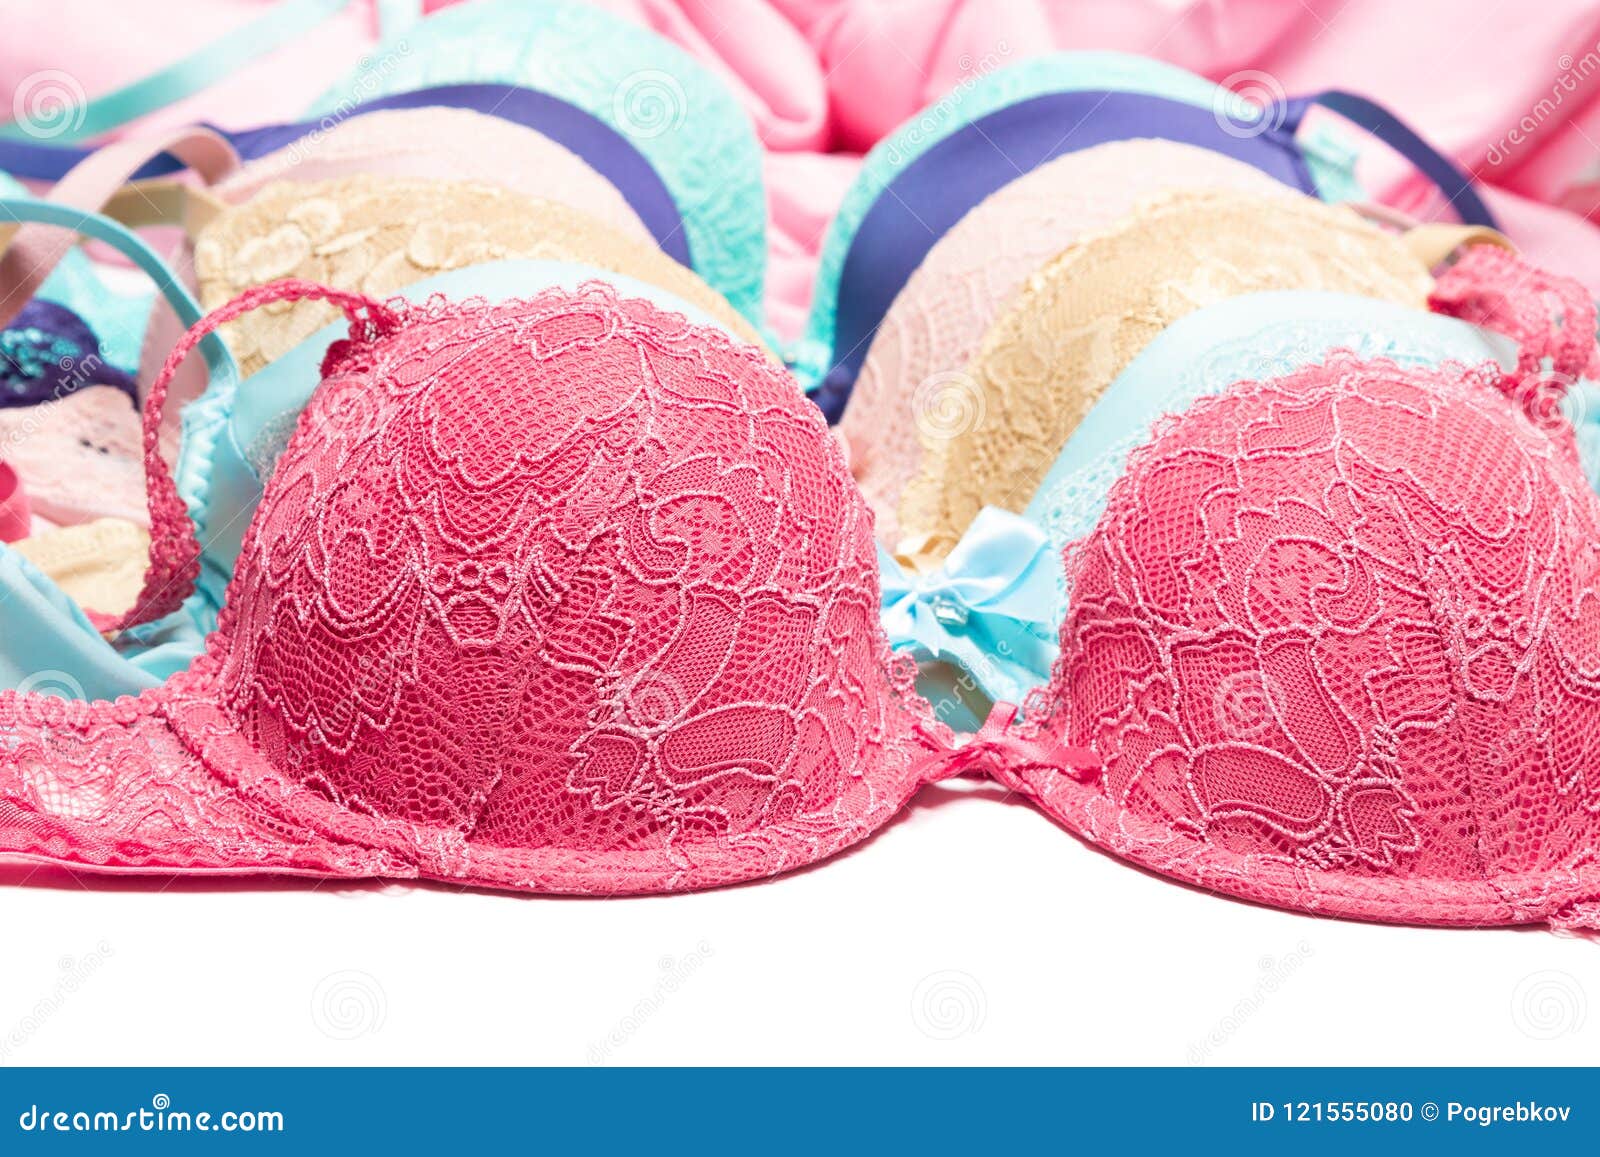 Various Colored Push-up Bras Close-up Stock Photo - Image of chic ...